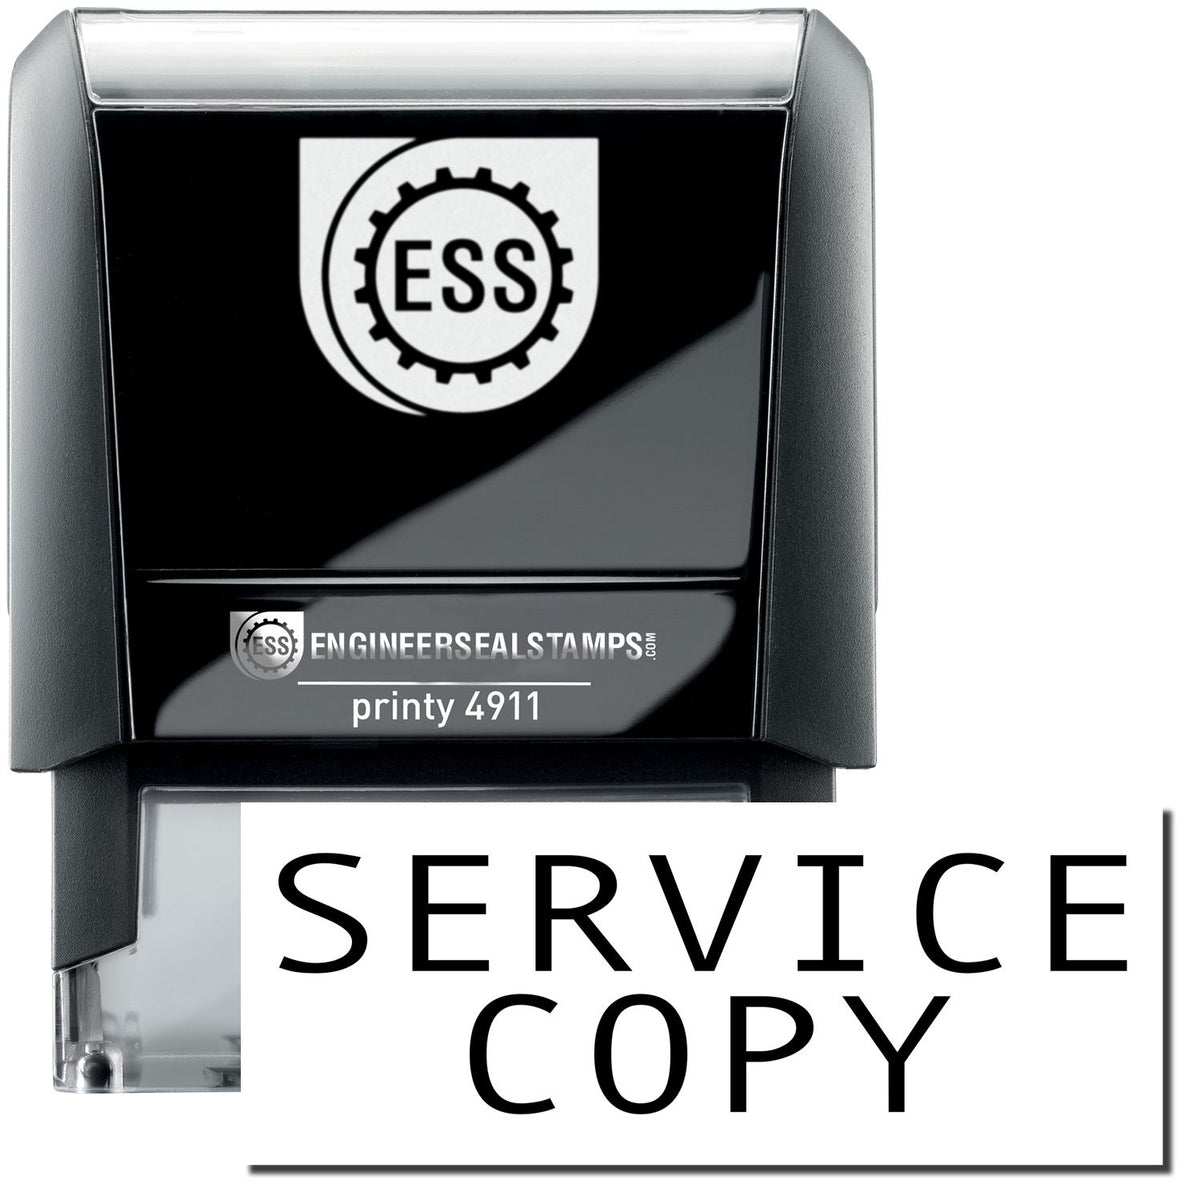 A self-inking stamp with a stamped image showing how the text &quot;SERVICE COPY&quot; is displayed after stamping.